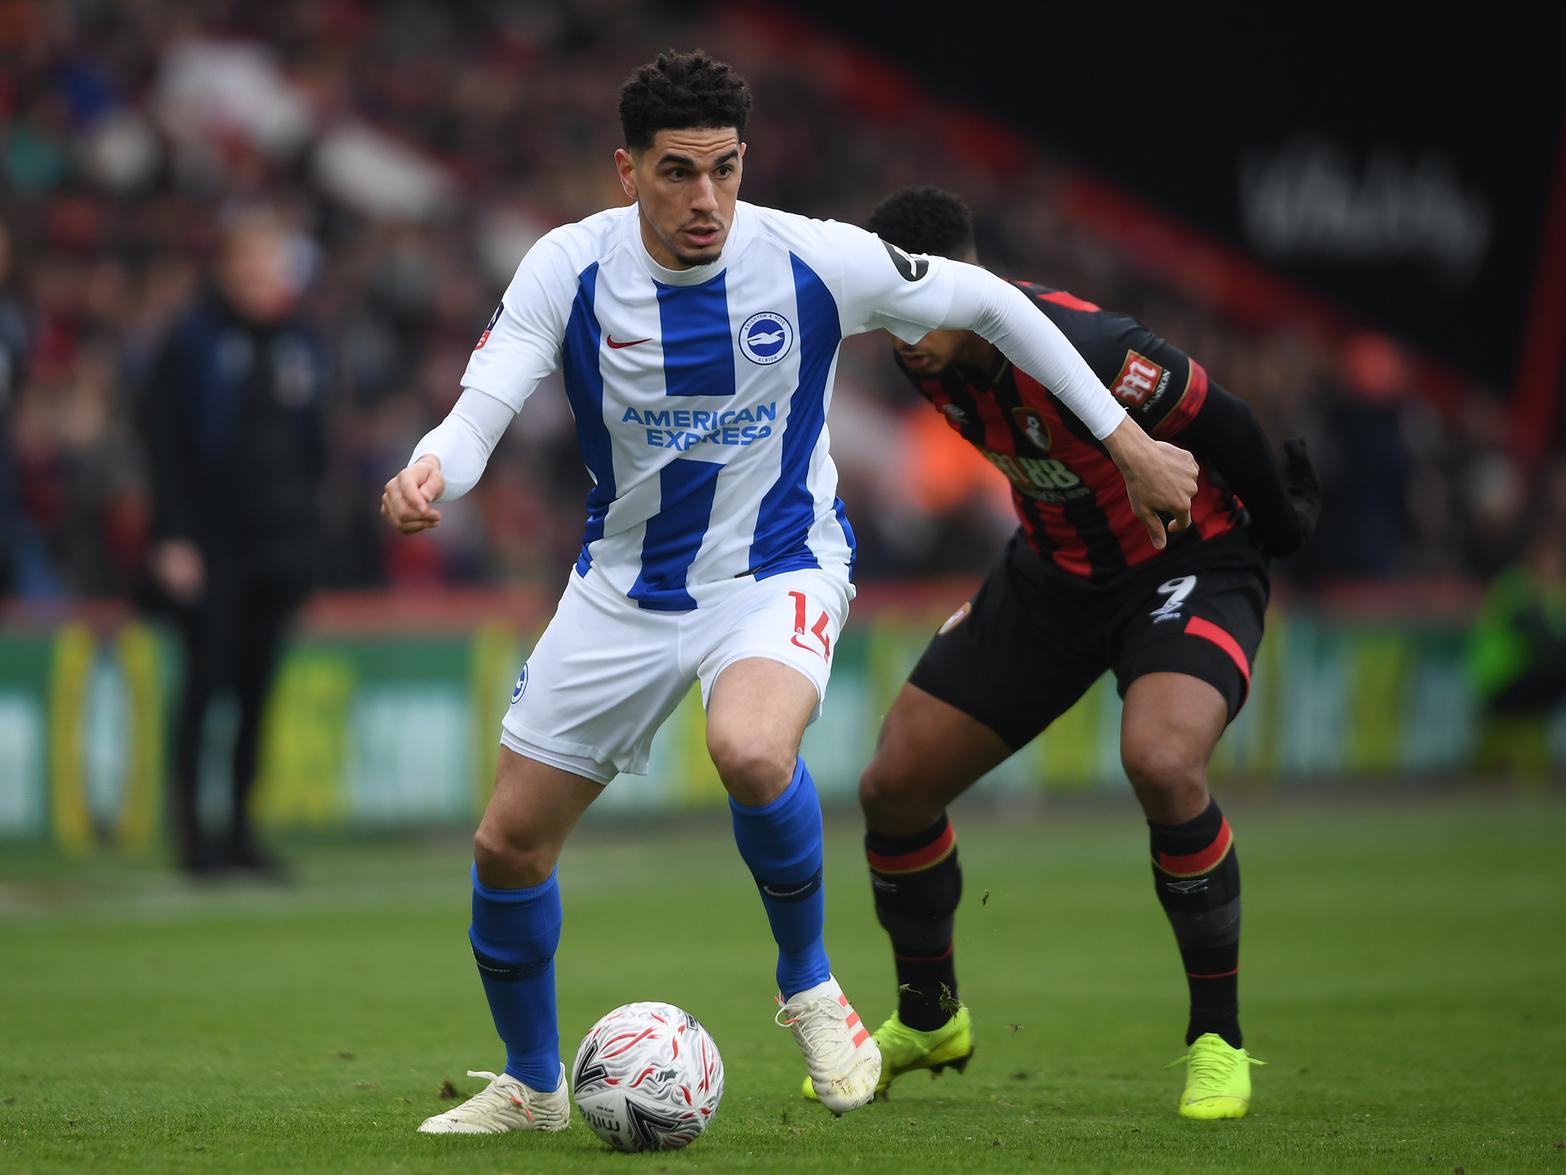 Defender joined on loan from Premier League Brighton until the end of the season. Only layed 12 times for the Seagulls after joining from in July 2018, but has over 200 career appearances and won 32 caps for Nigeria.